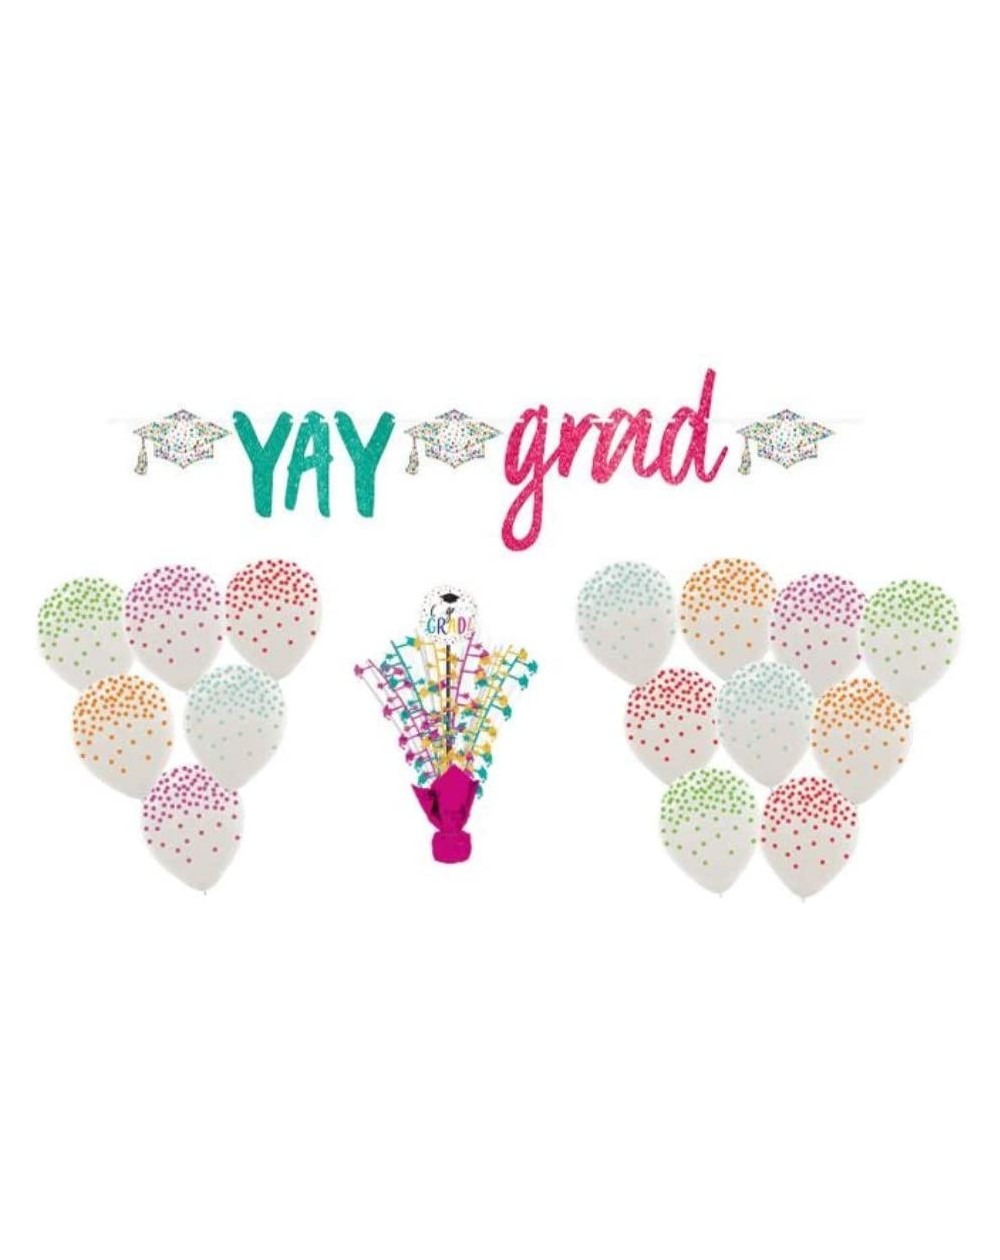 Centerpieces Grad Party Decorations Kit with Centerpiece- Banner and Balloons in Pink and Teal - CQ19CH8AM0M $18.52